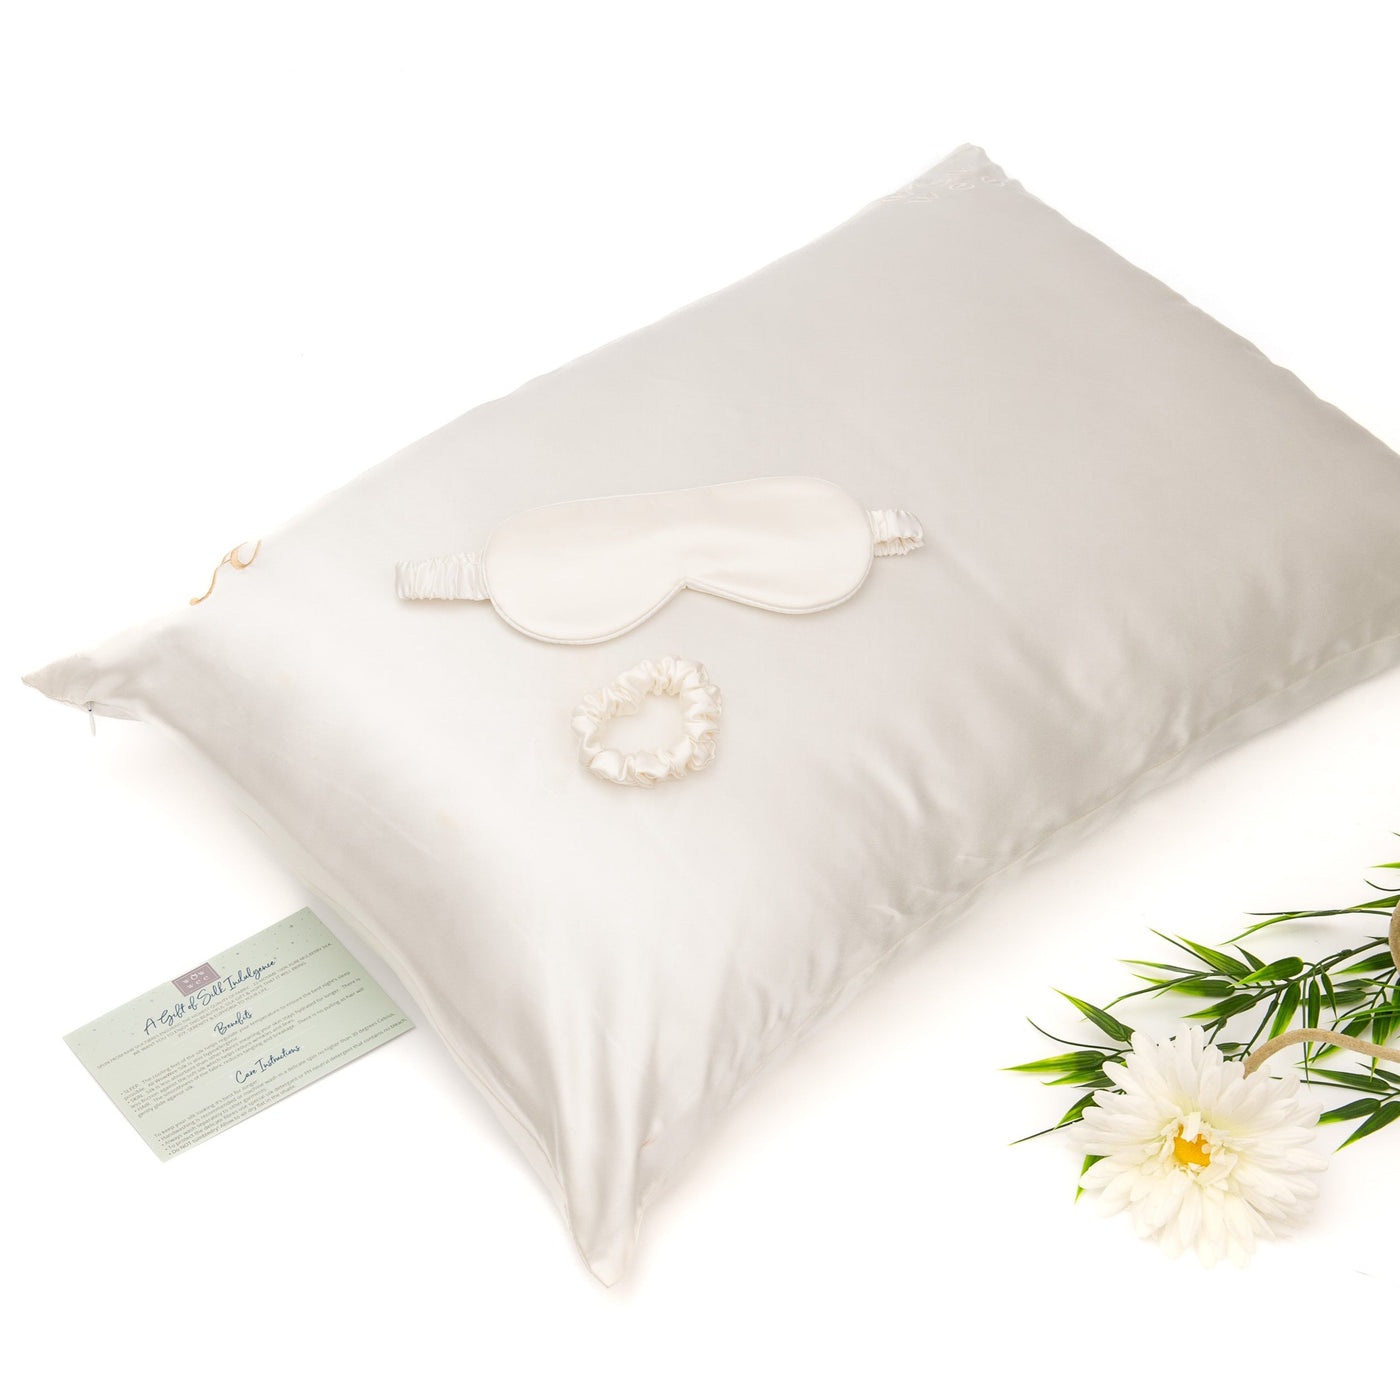 Luxurious 100% Mulberry Silk 3-Piece Gift Set - Pillow Case Personalised with Initial